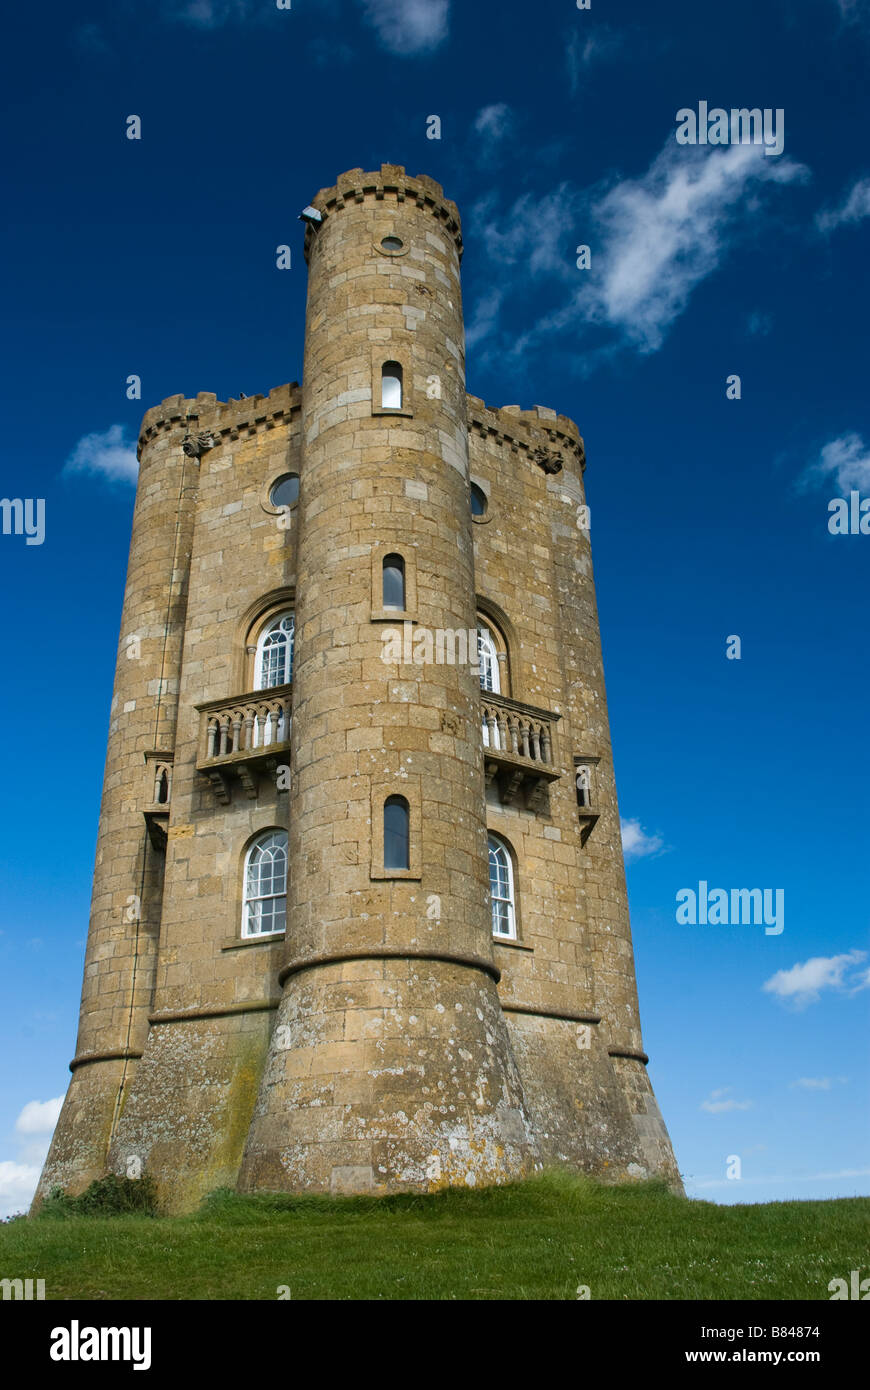 Broadway Tower The Cotswolds Worcestershire England UK Stock Photo